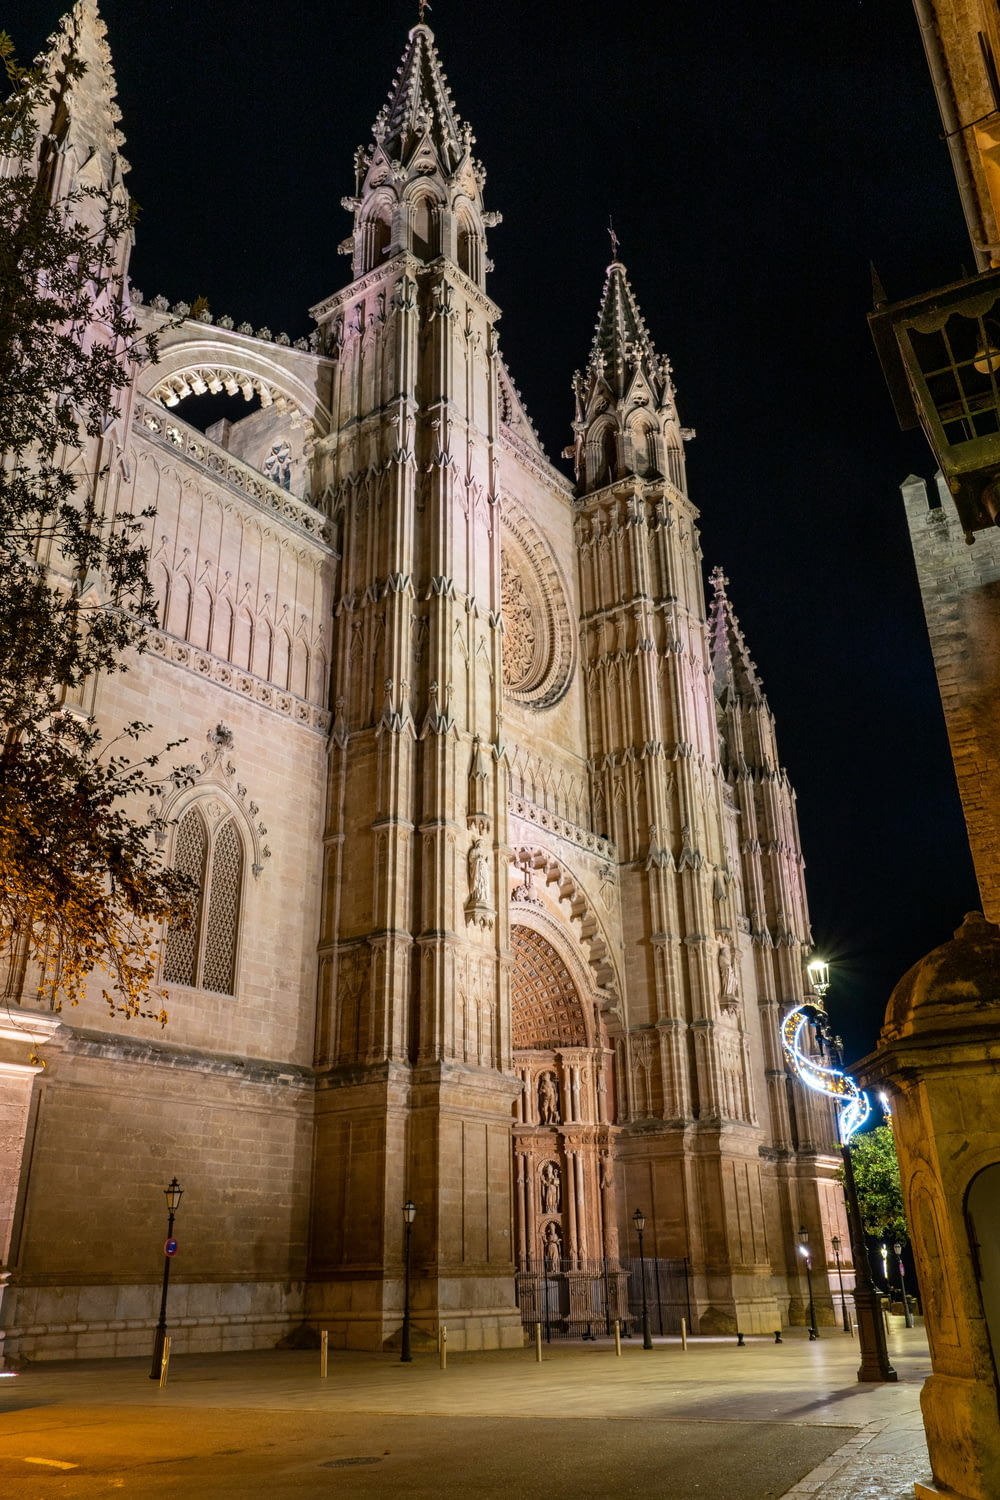 a large cathedral lit up at night with a clock